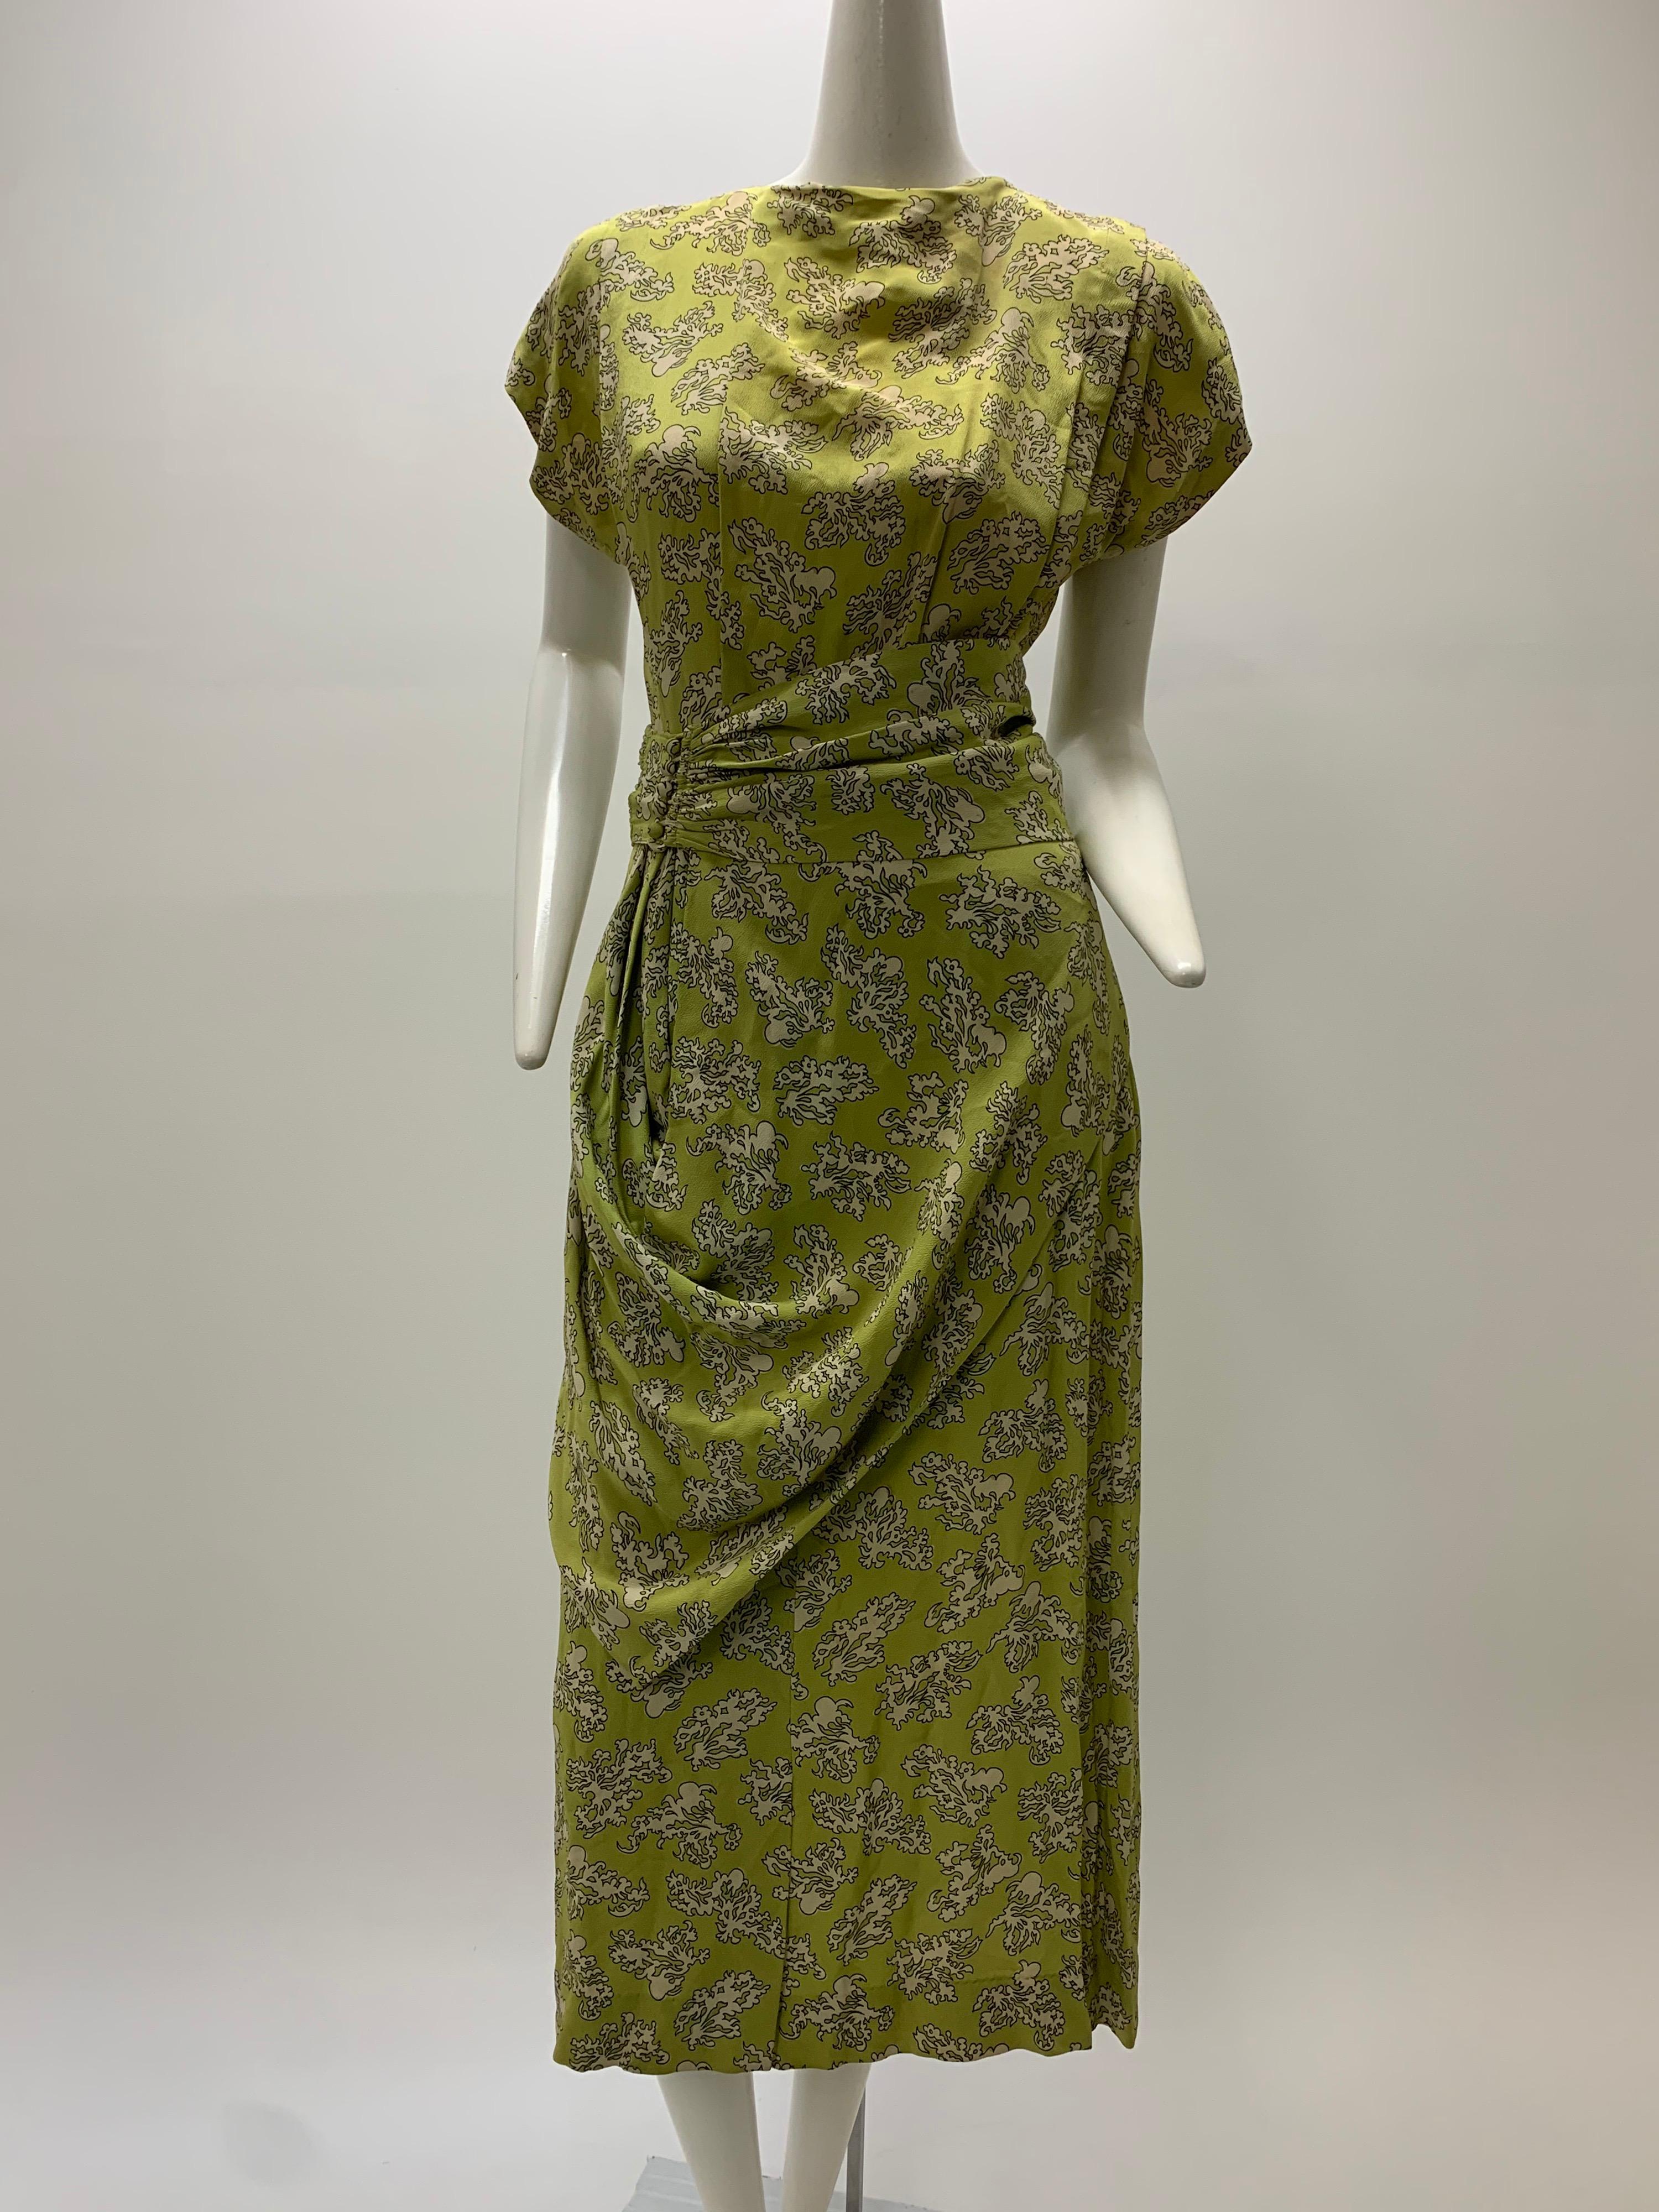 A beautiful 1940s Marian McCoy chartreuse and cream abstract print coral/floral rayon crepe dress with draped hip detail, separate cummerbund belted waist, short sleeved drop shoulders and a keyhole back closure. Mid-calf length. 